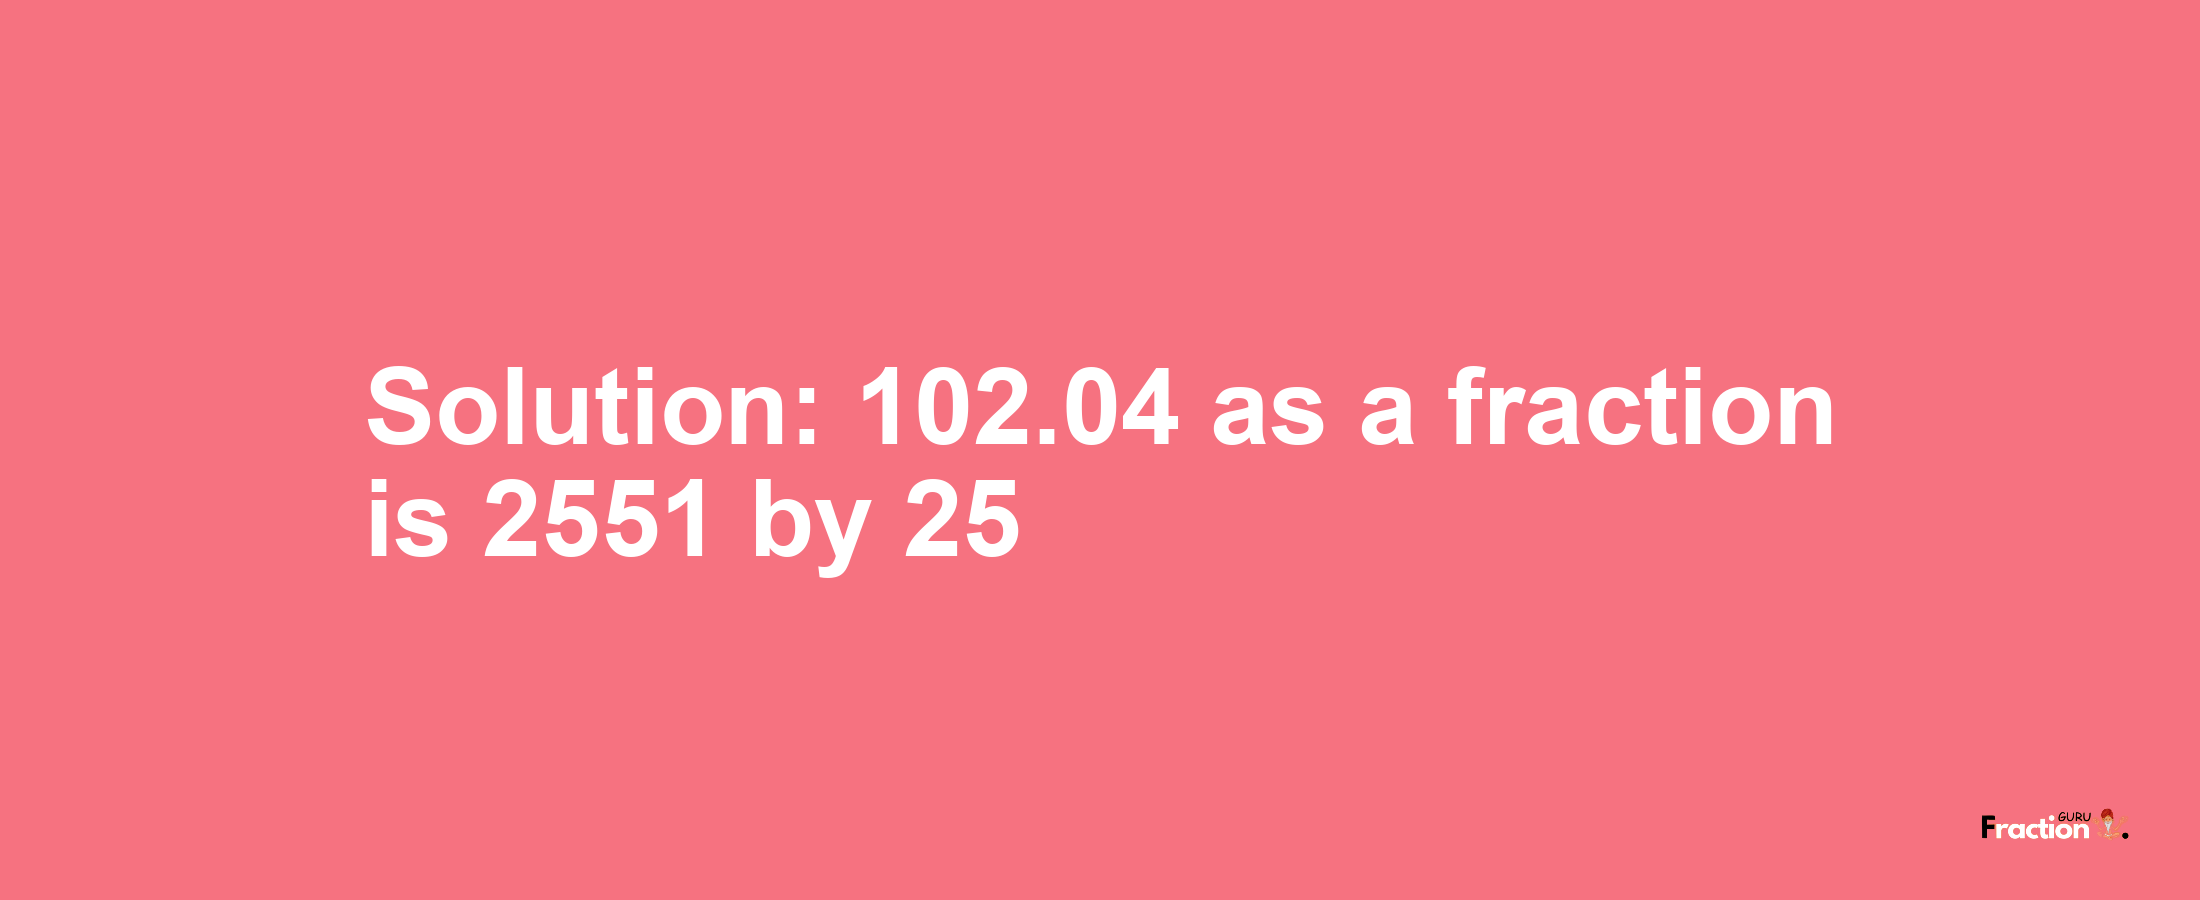 Solution:102.04 as a fraction is 2551/25